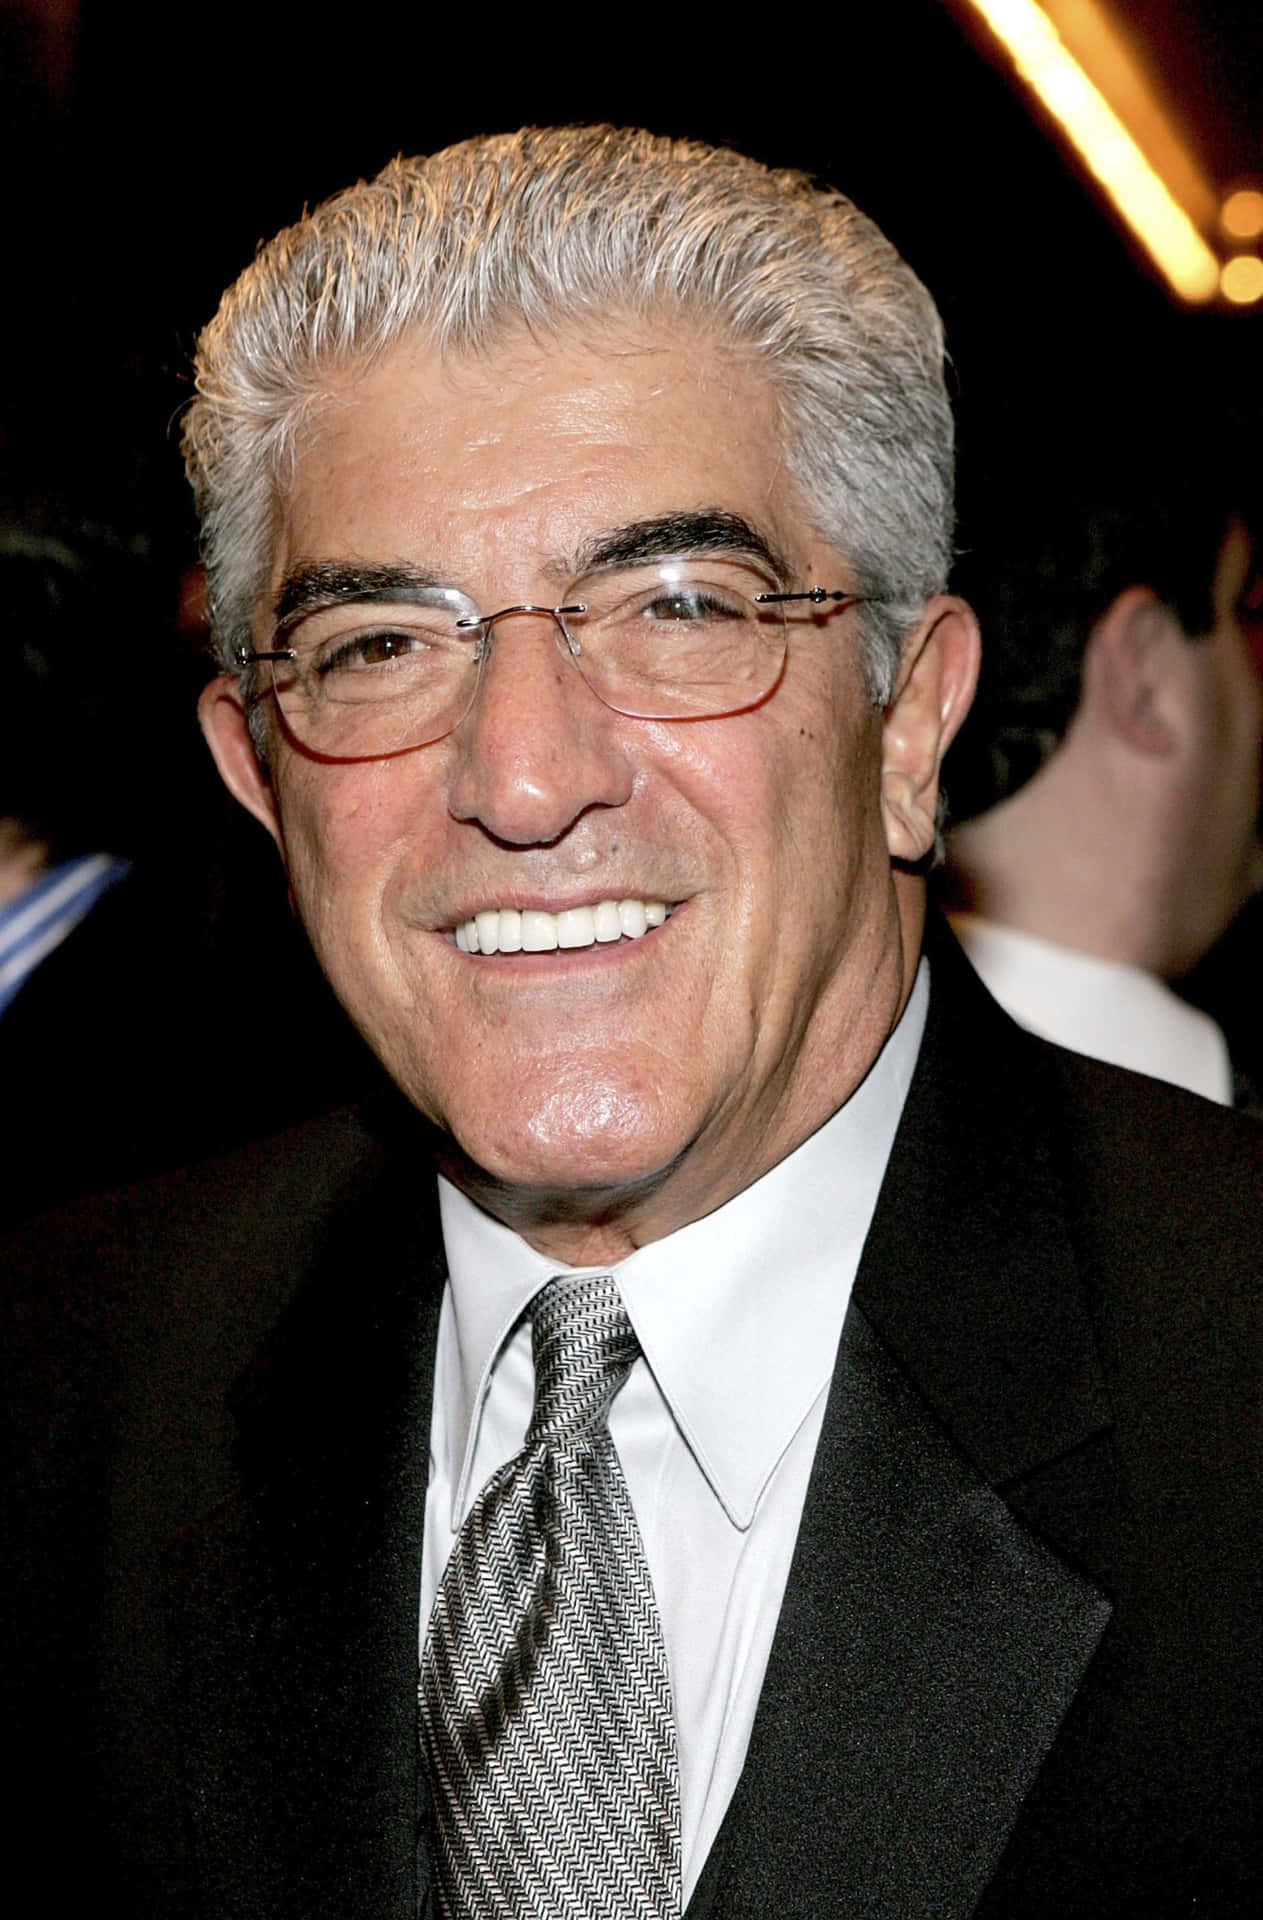 Frank Vincent in his early years Wallpaper